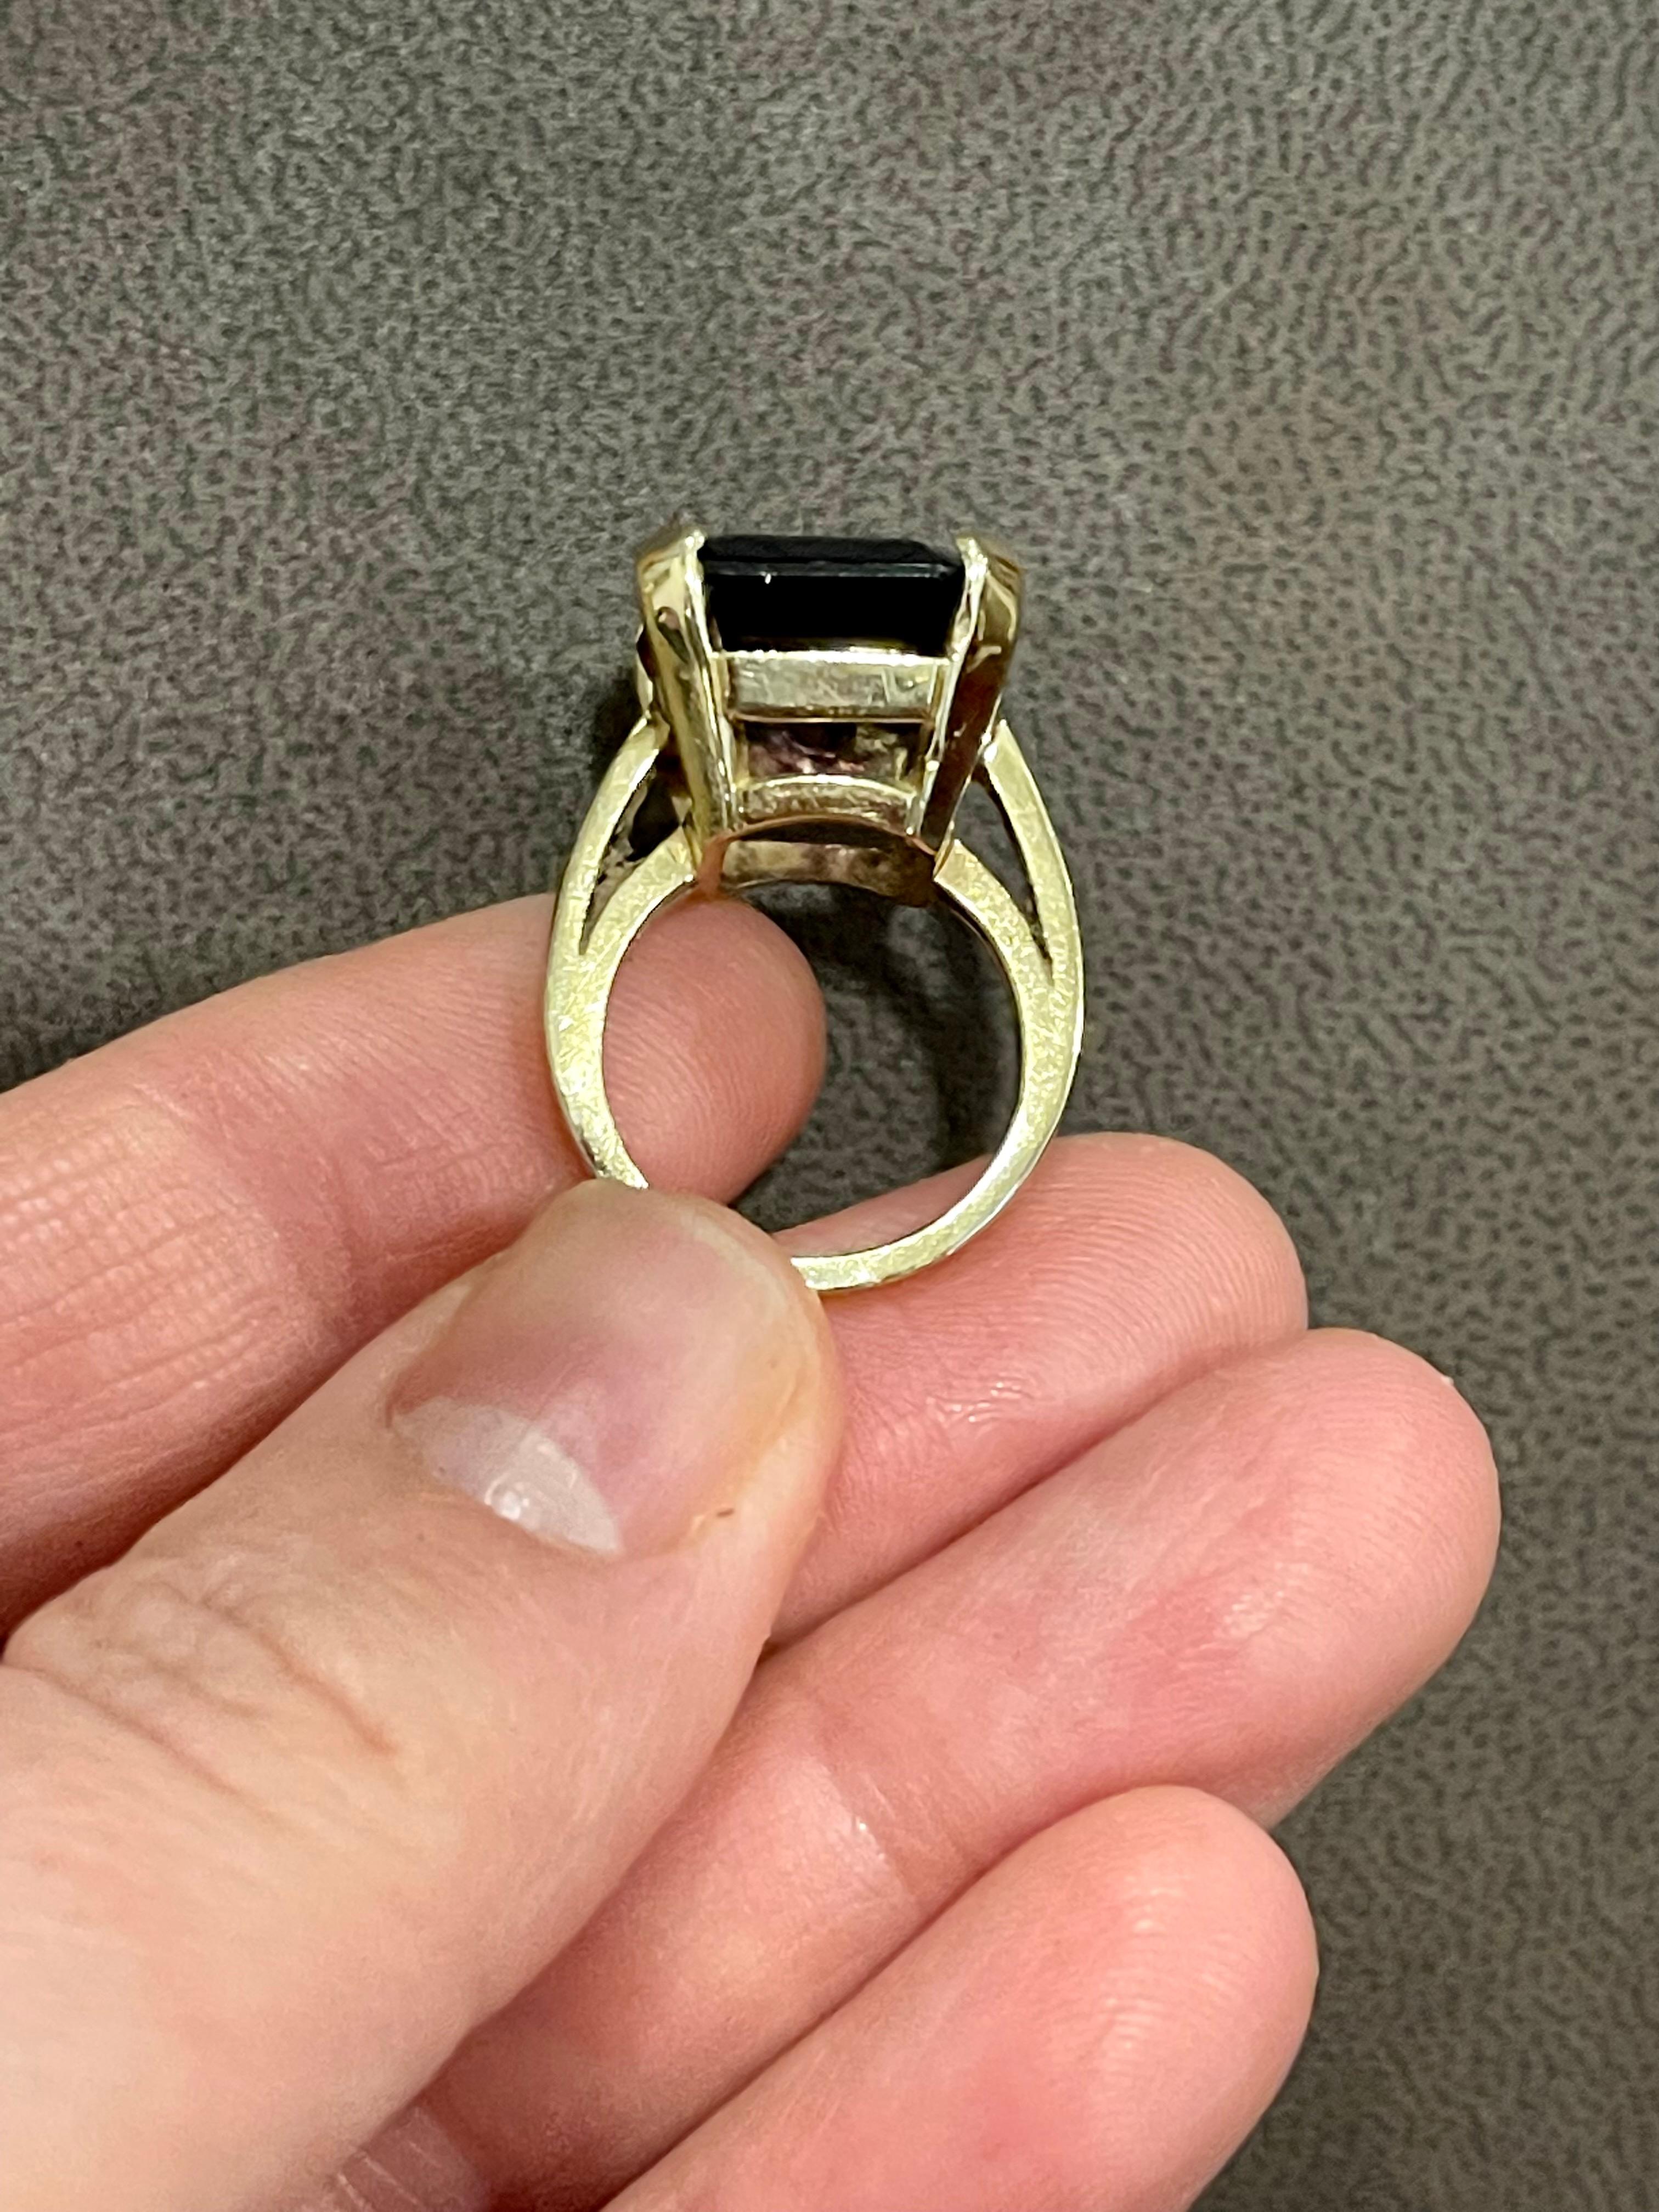 15 Carat Emerald Cut Amethyst Cocktail Ring in 14 Karat Yellow Gold For Sale 14